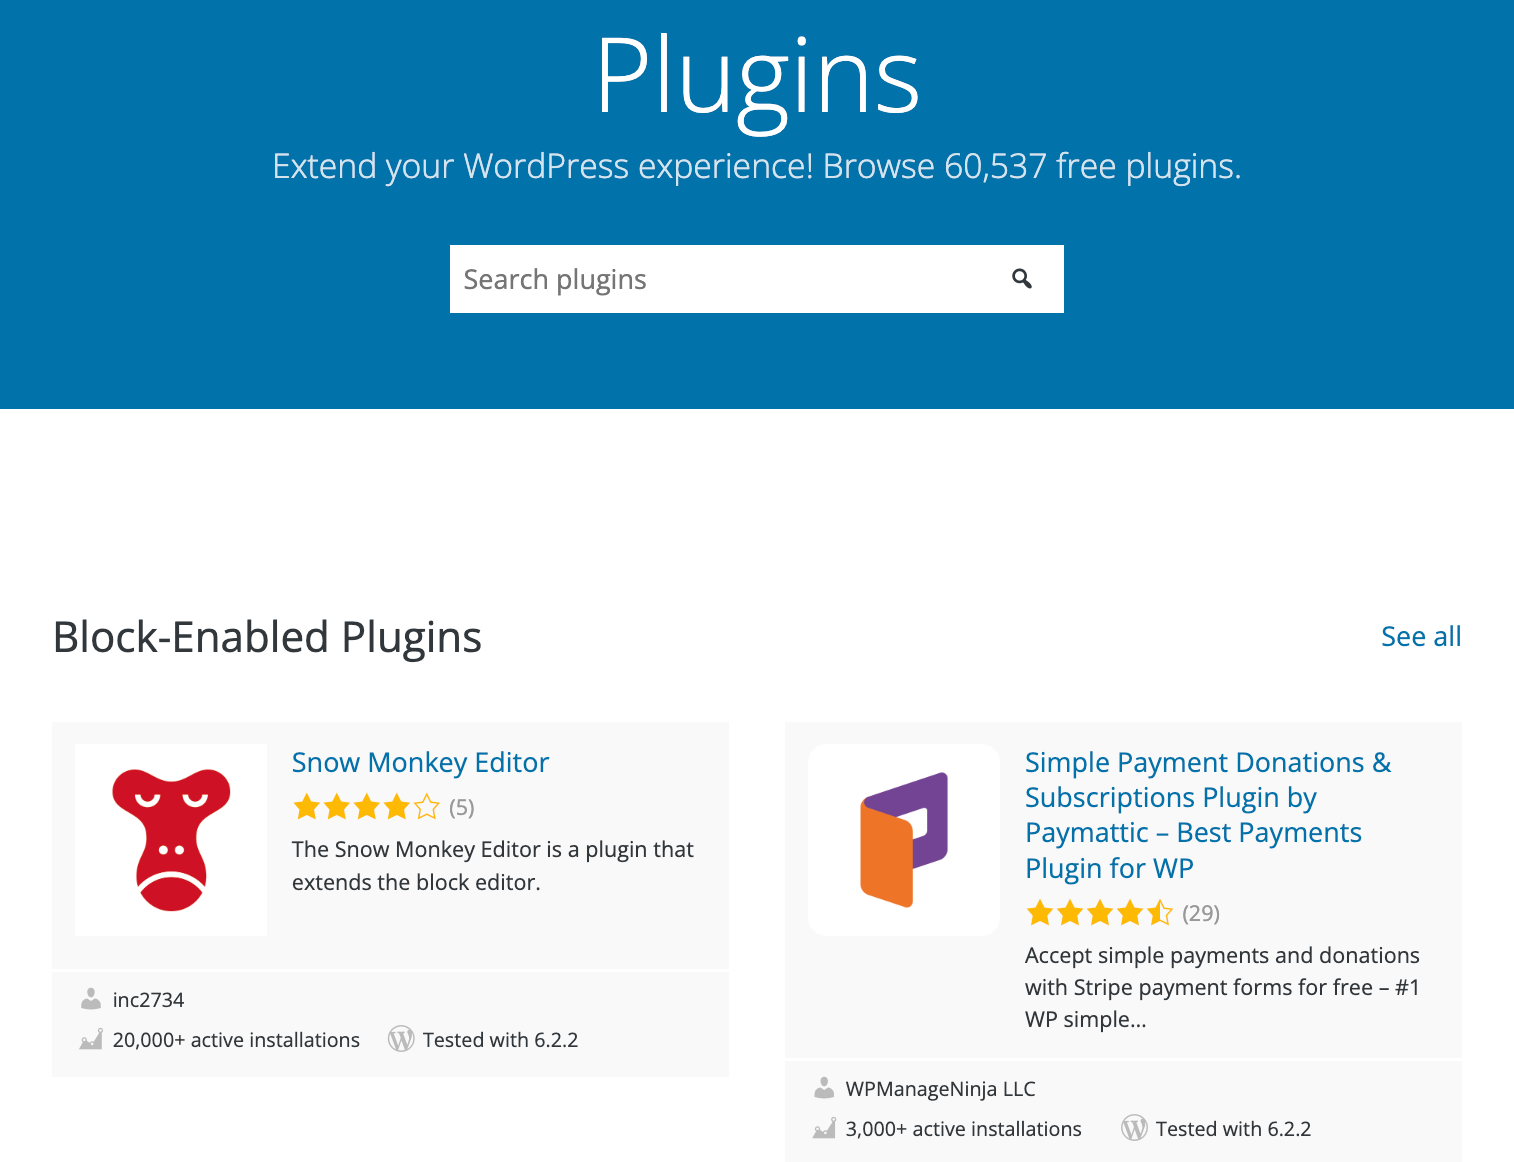 There are 60,000+ plugins available for WordPress users.